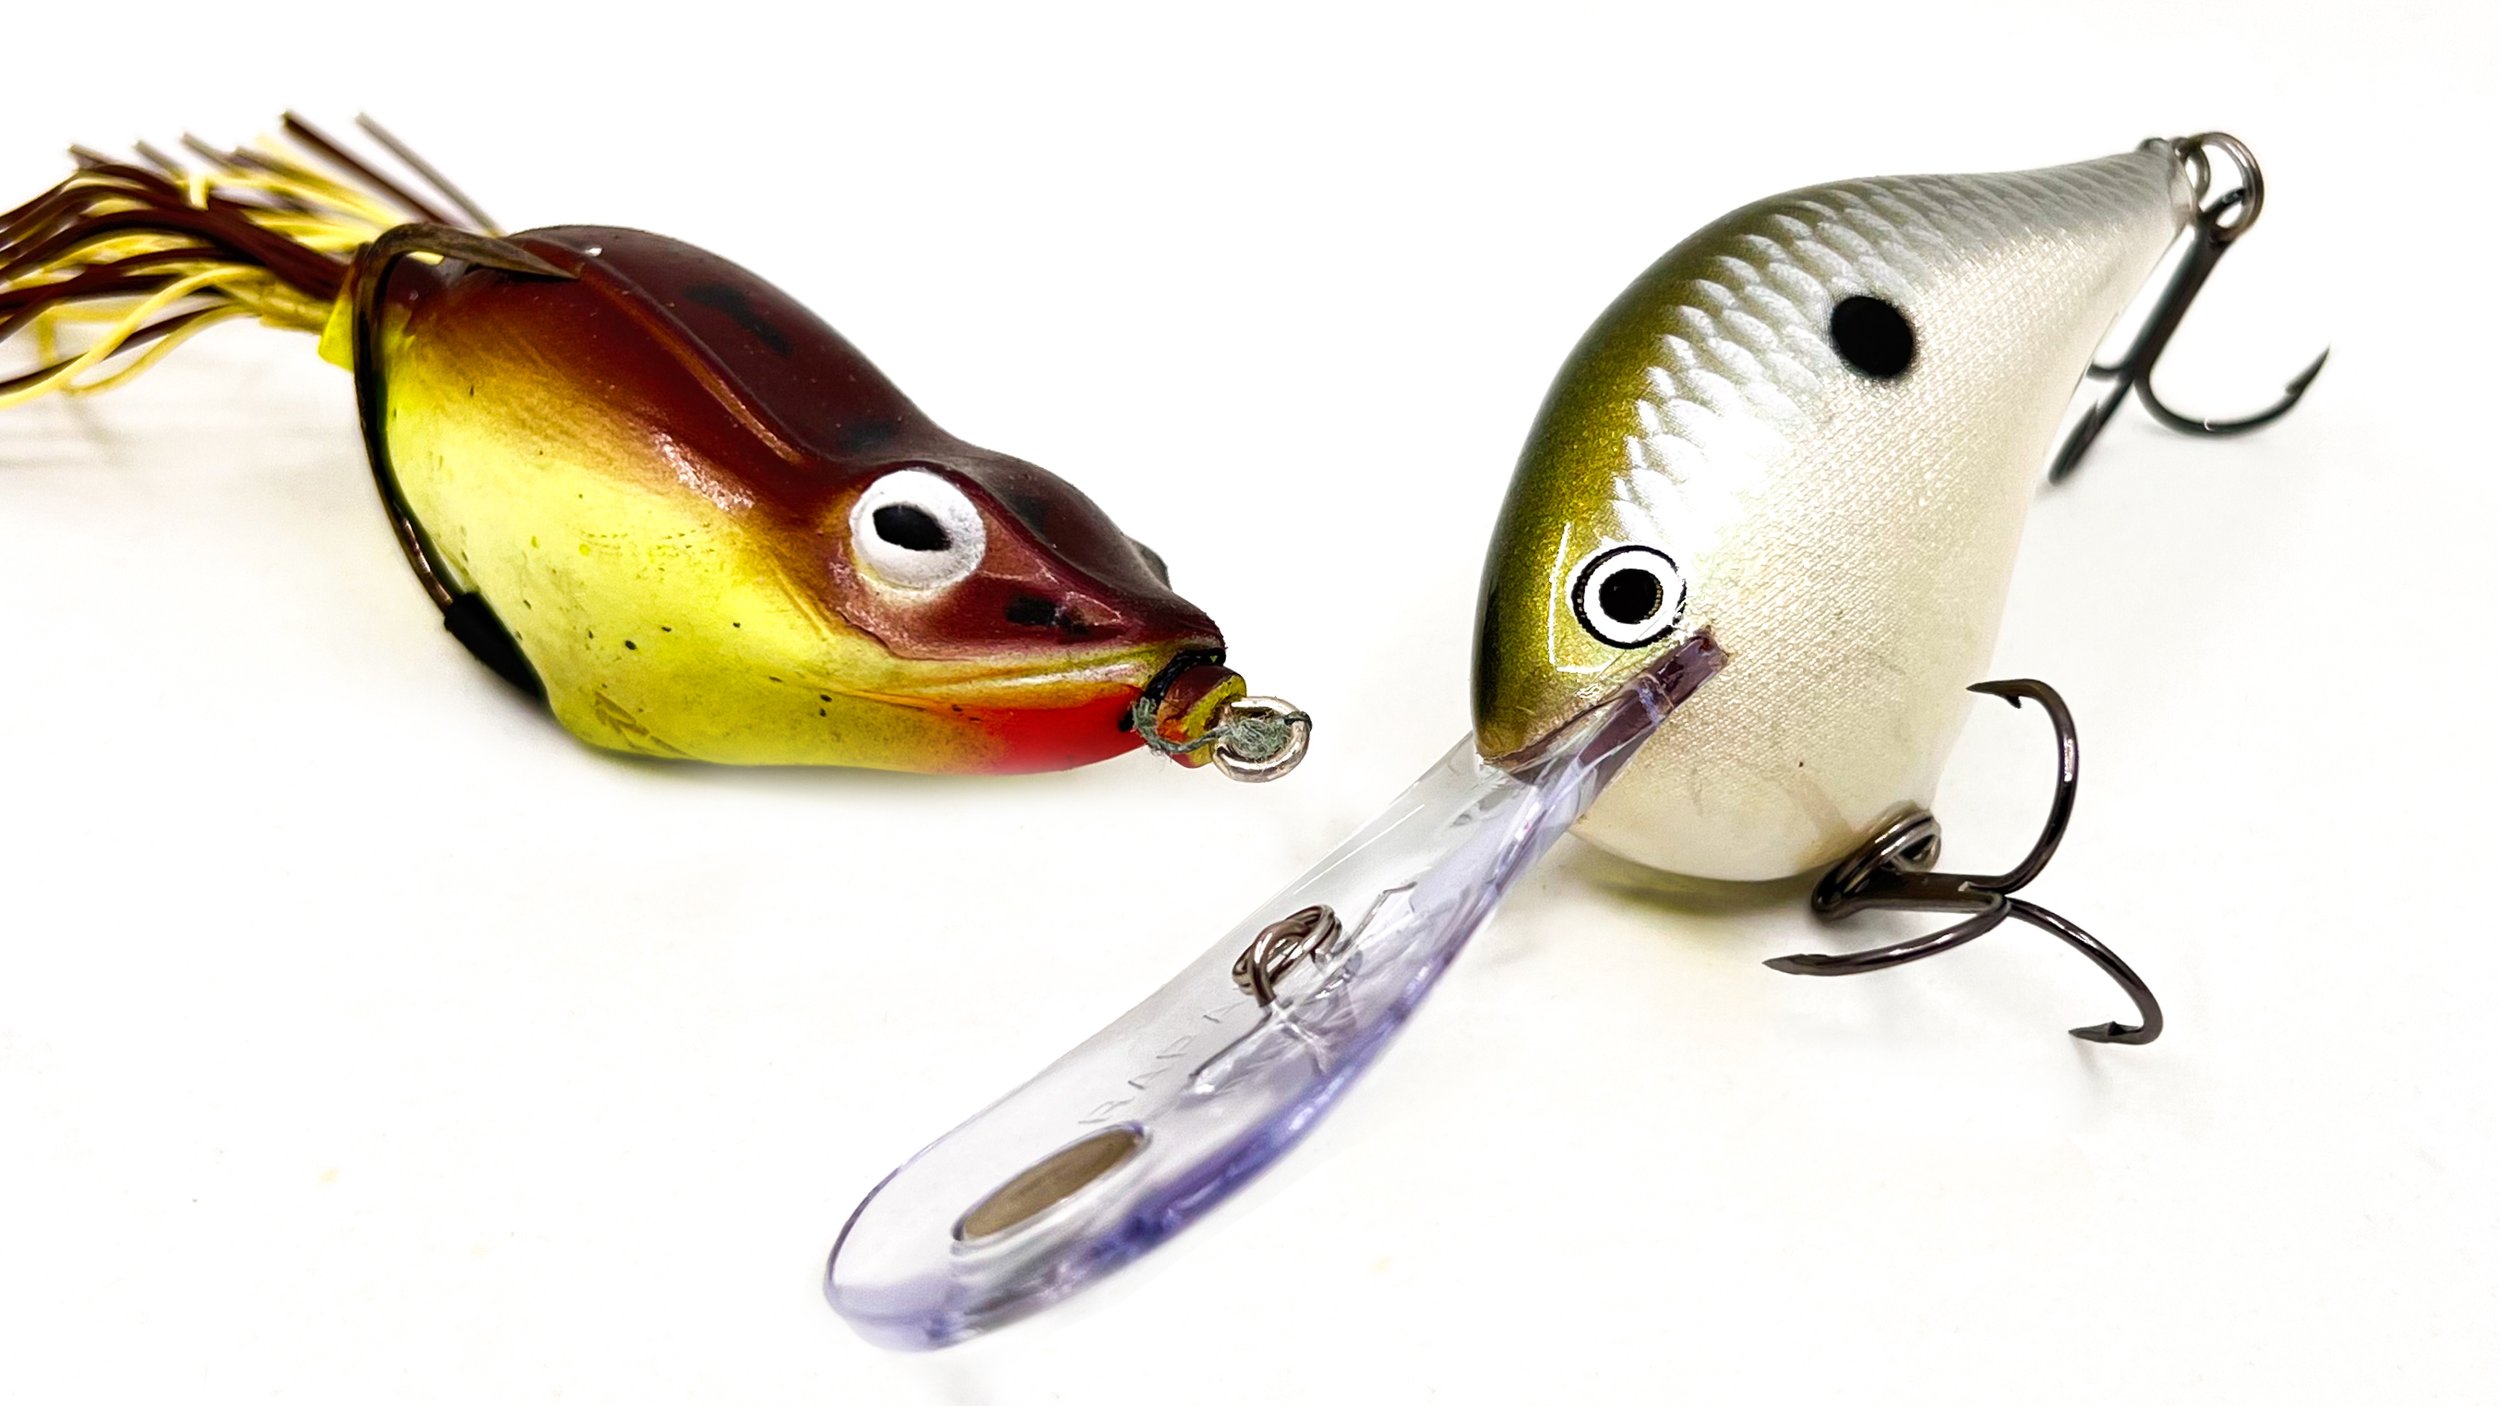 Top 5 Baits For June Bass Fishing! — Tactical Bassin' - Bass